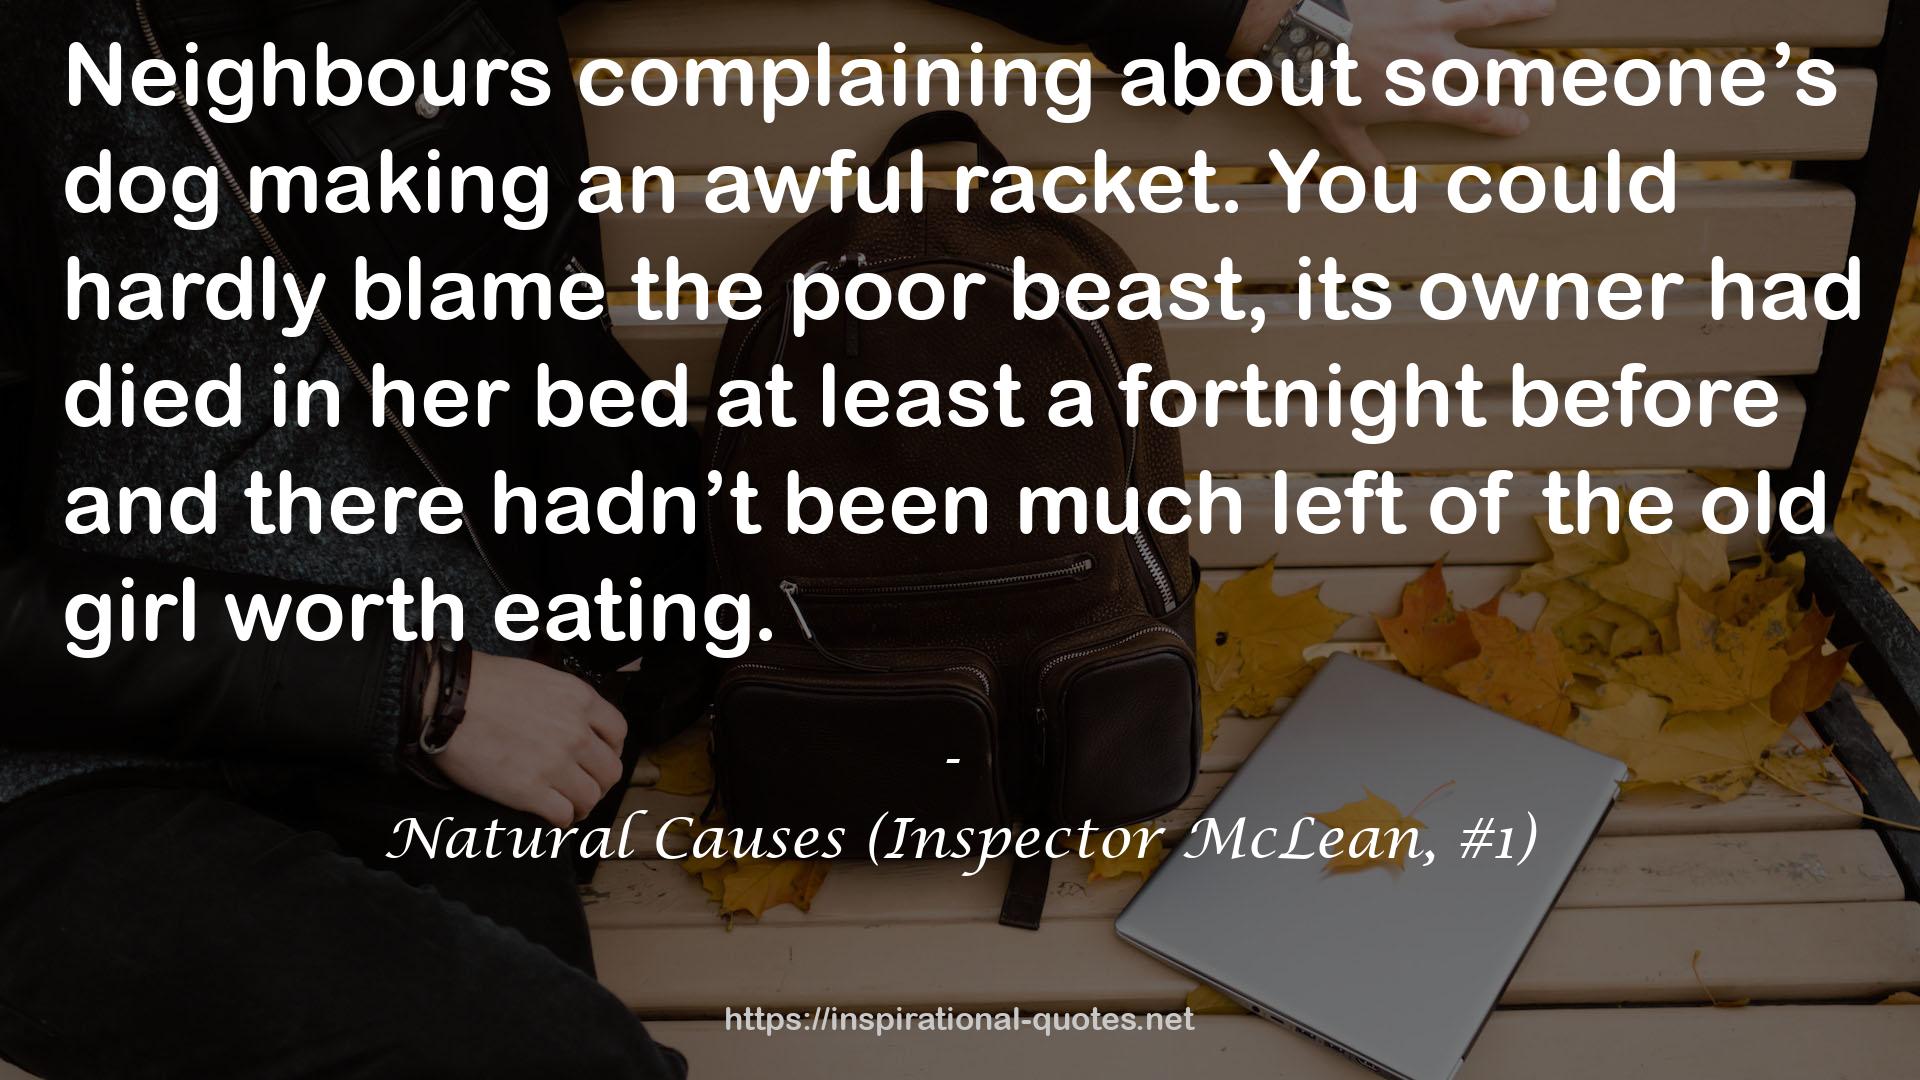 Natural Causes (Inspector McLean, #1) QUOTES